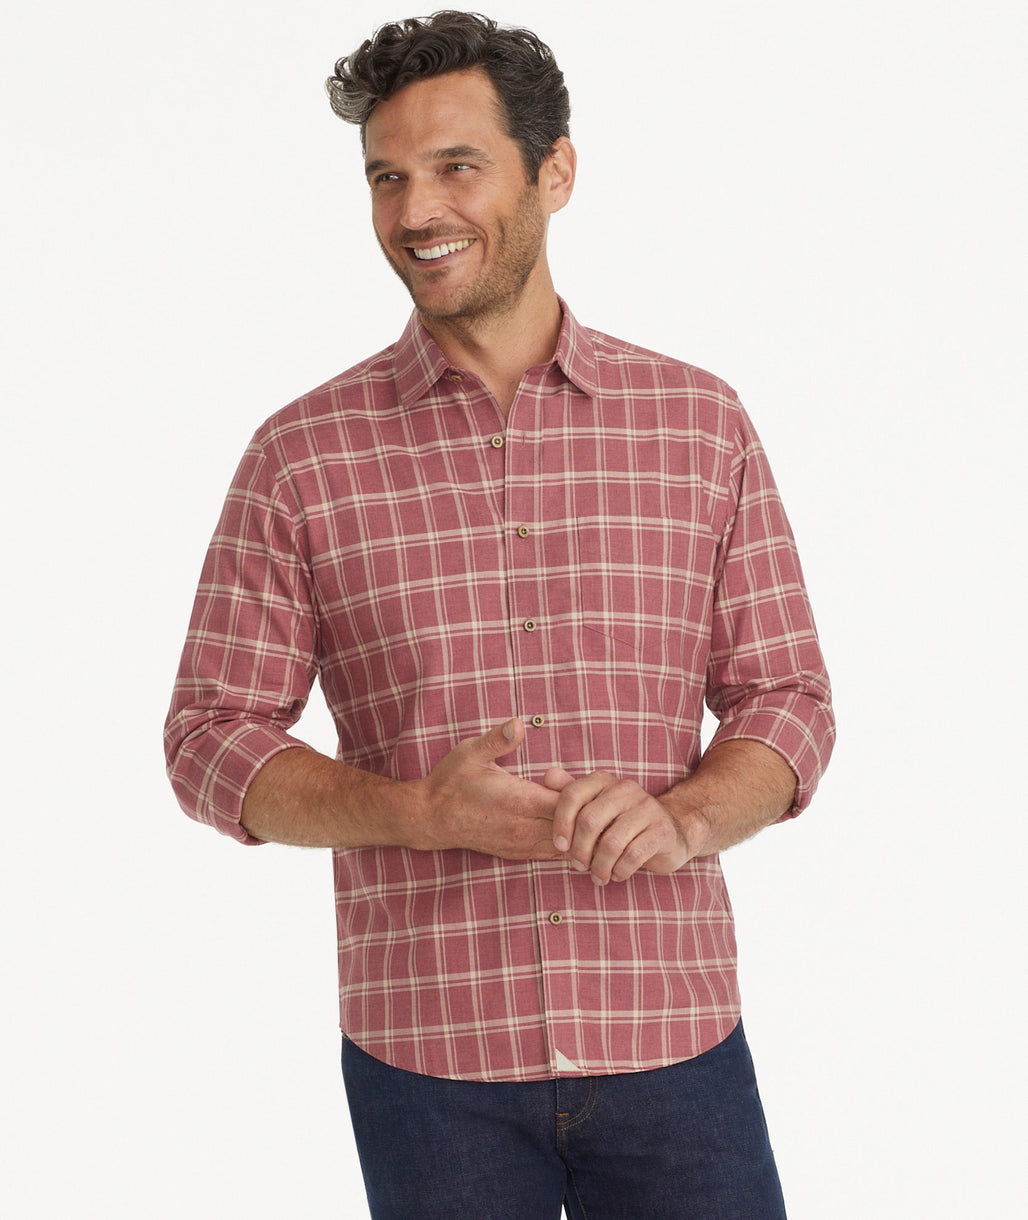 Model wearing a Light Red Wrinkle-Free Colson Shirt